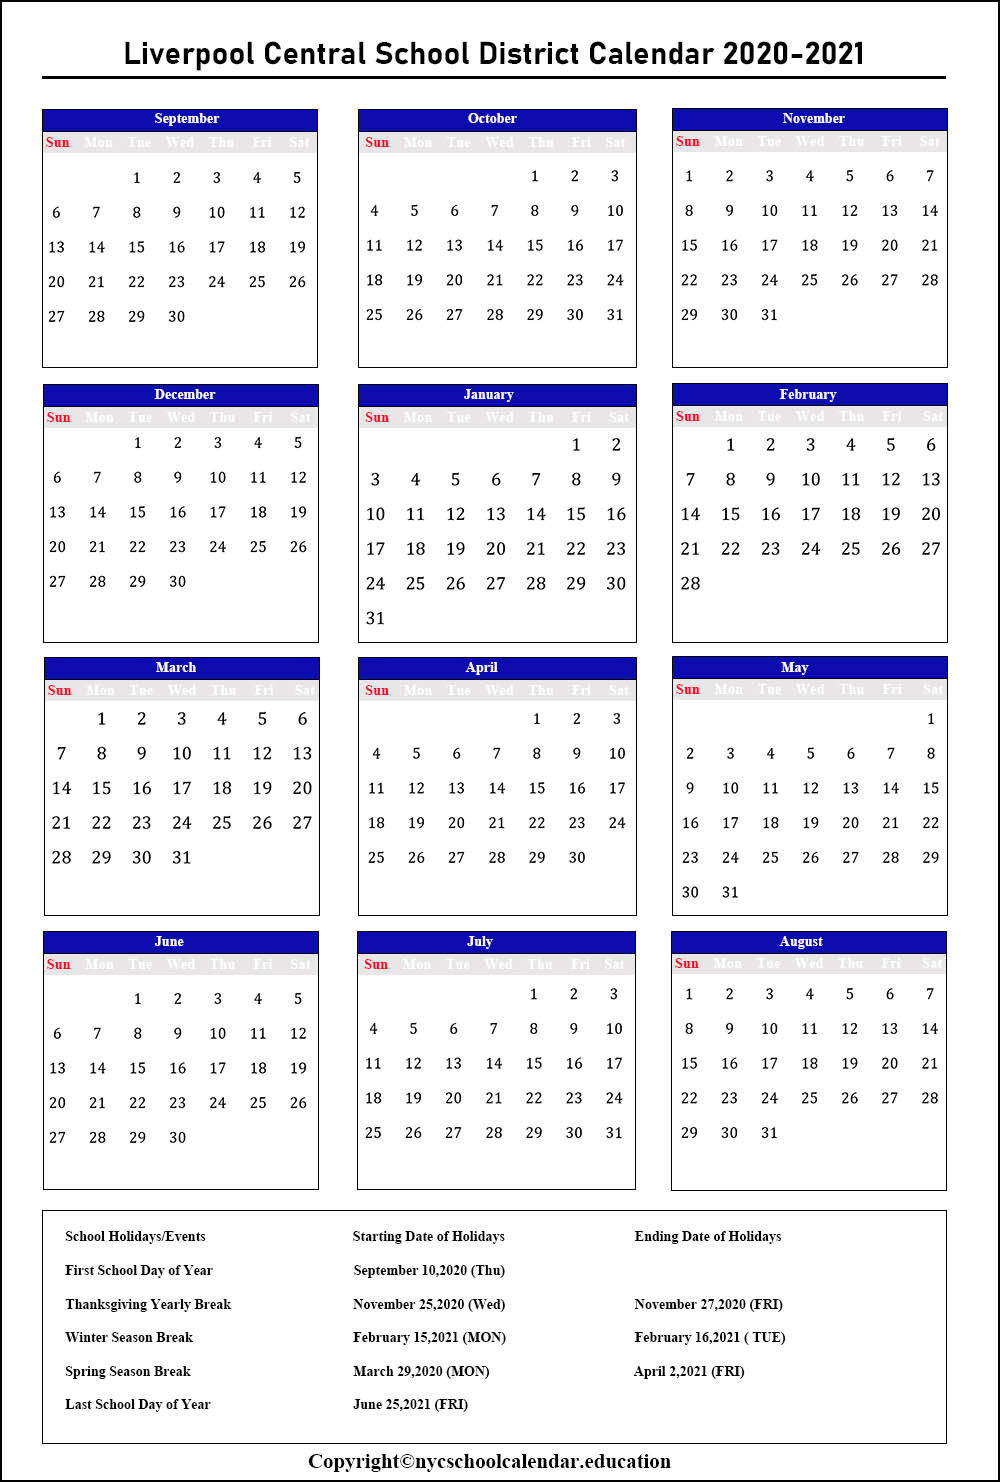 Liverpool Central School District Archives | Nyc School Calendar Holidays-Nyc School Calendar 2021 To 2022 Pdf